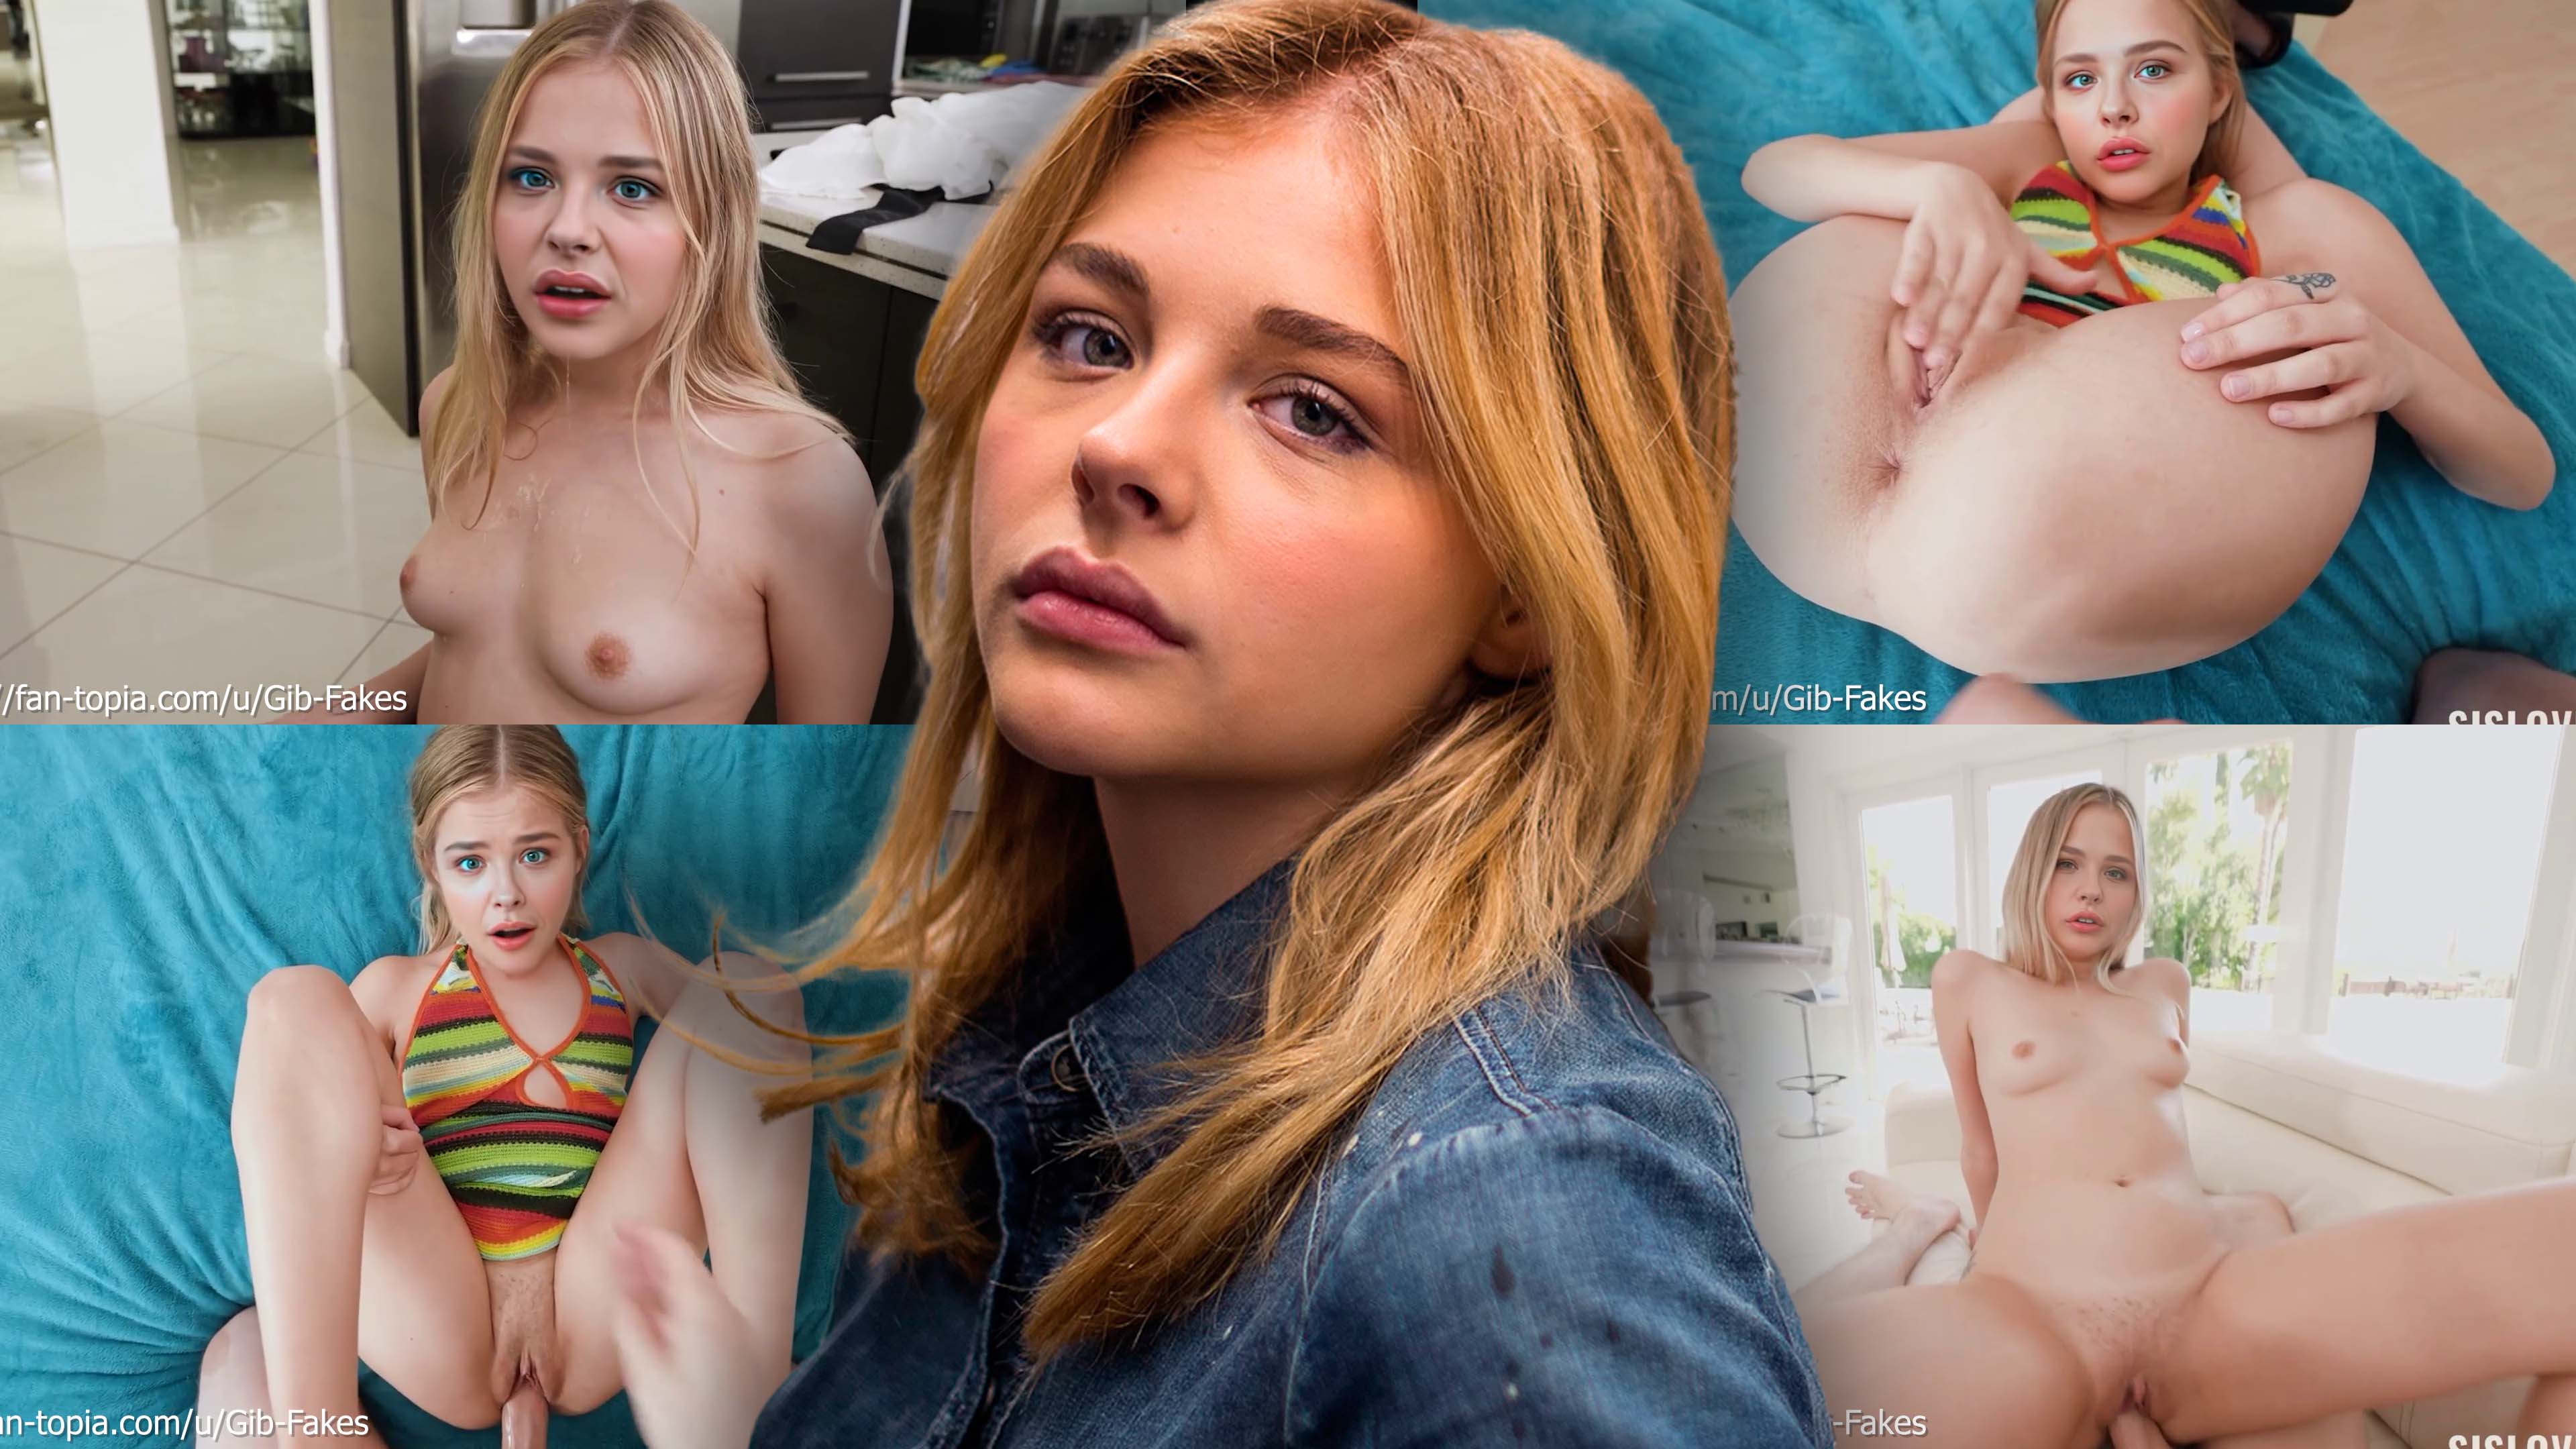 dave gowenlock recommends Chloe Grace Moretz Fake Nude Pics